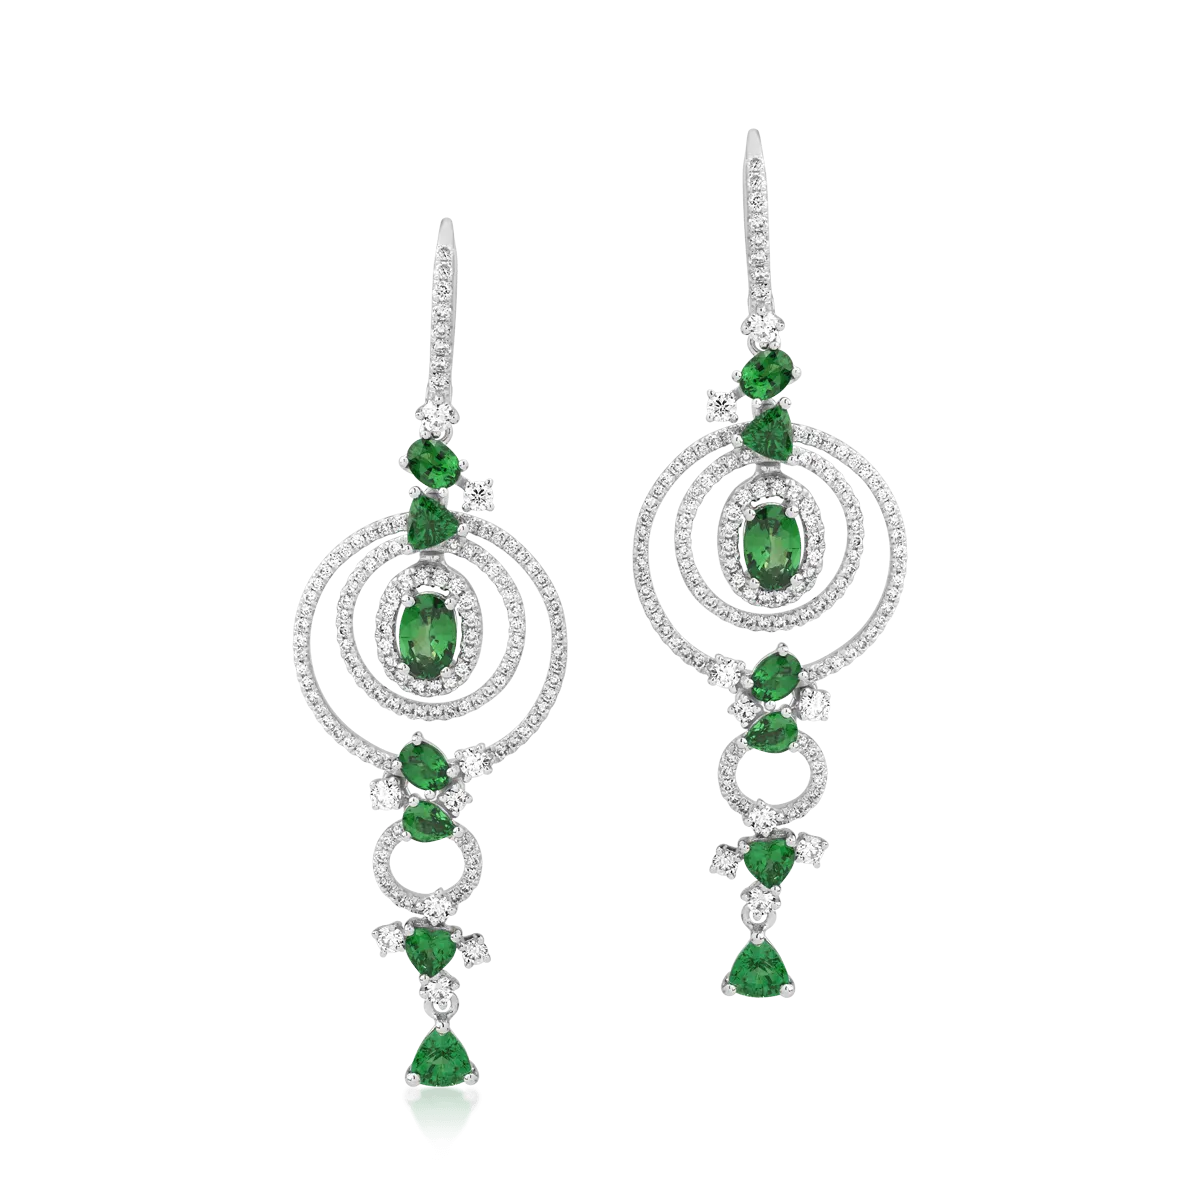 18K white gold earrings with 3.29ct green garnets and 1.65ct diamonds